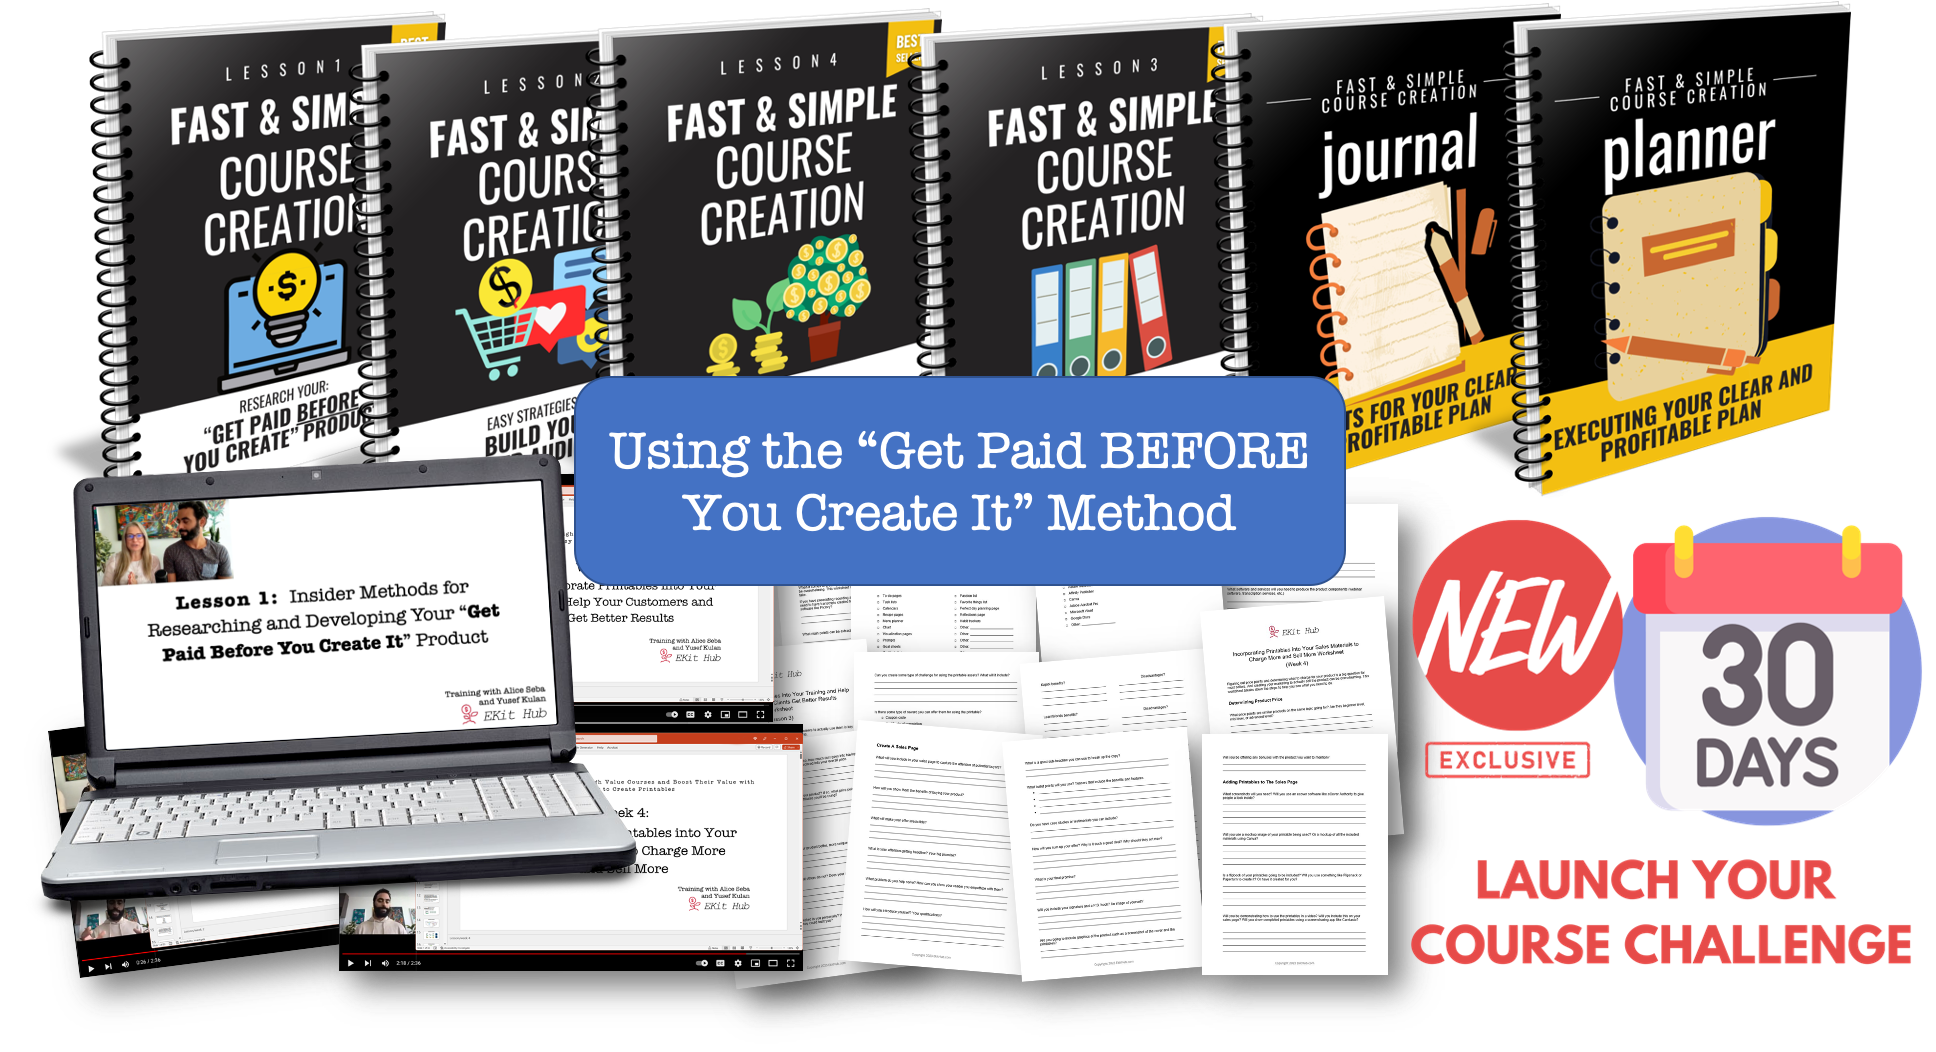 Fast & Simple Course Creation and Printables Training